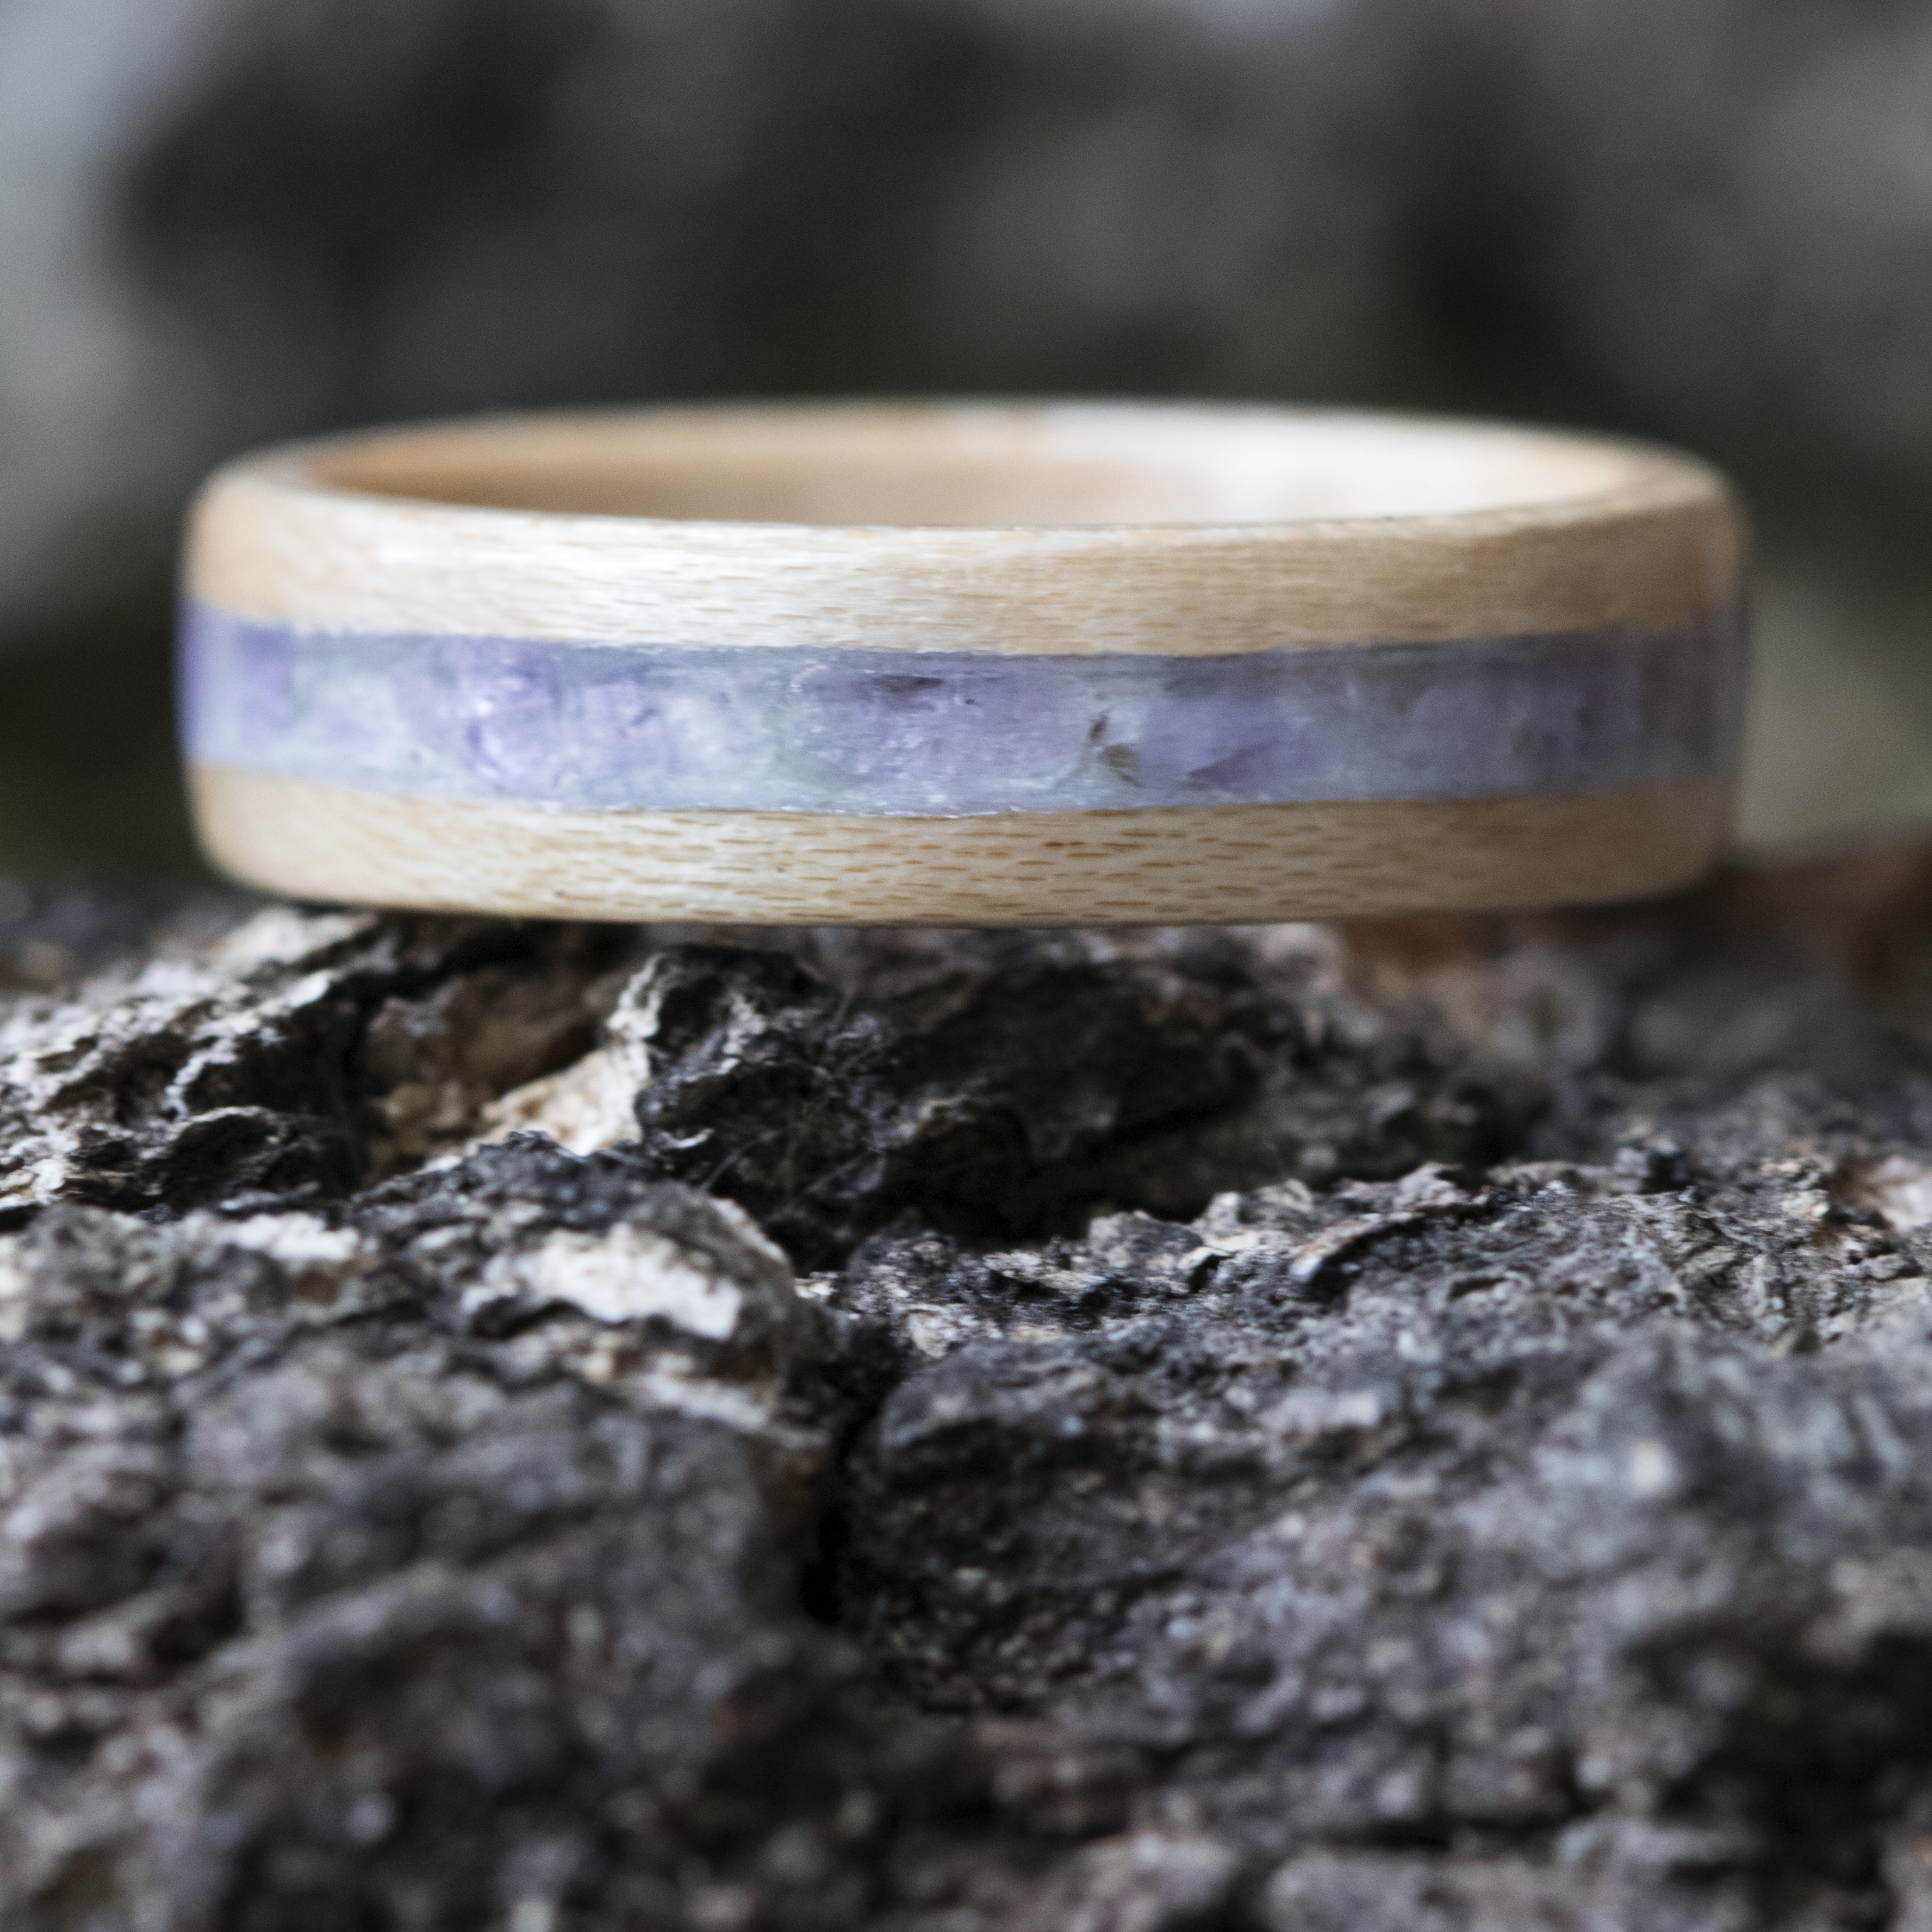 Wood Ring Size 5.75 In Stock and Ready to Ship Maple wood ring with Chrysocolla inlay 5mm width